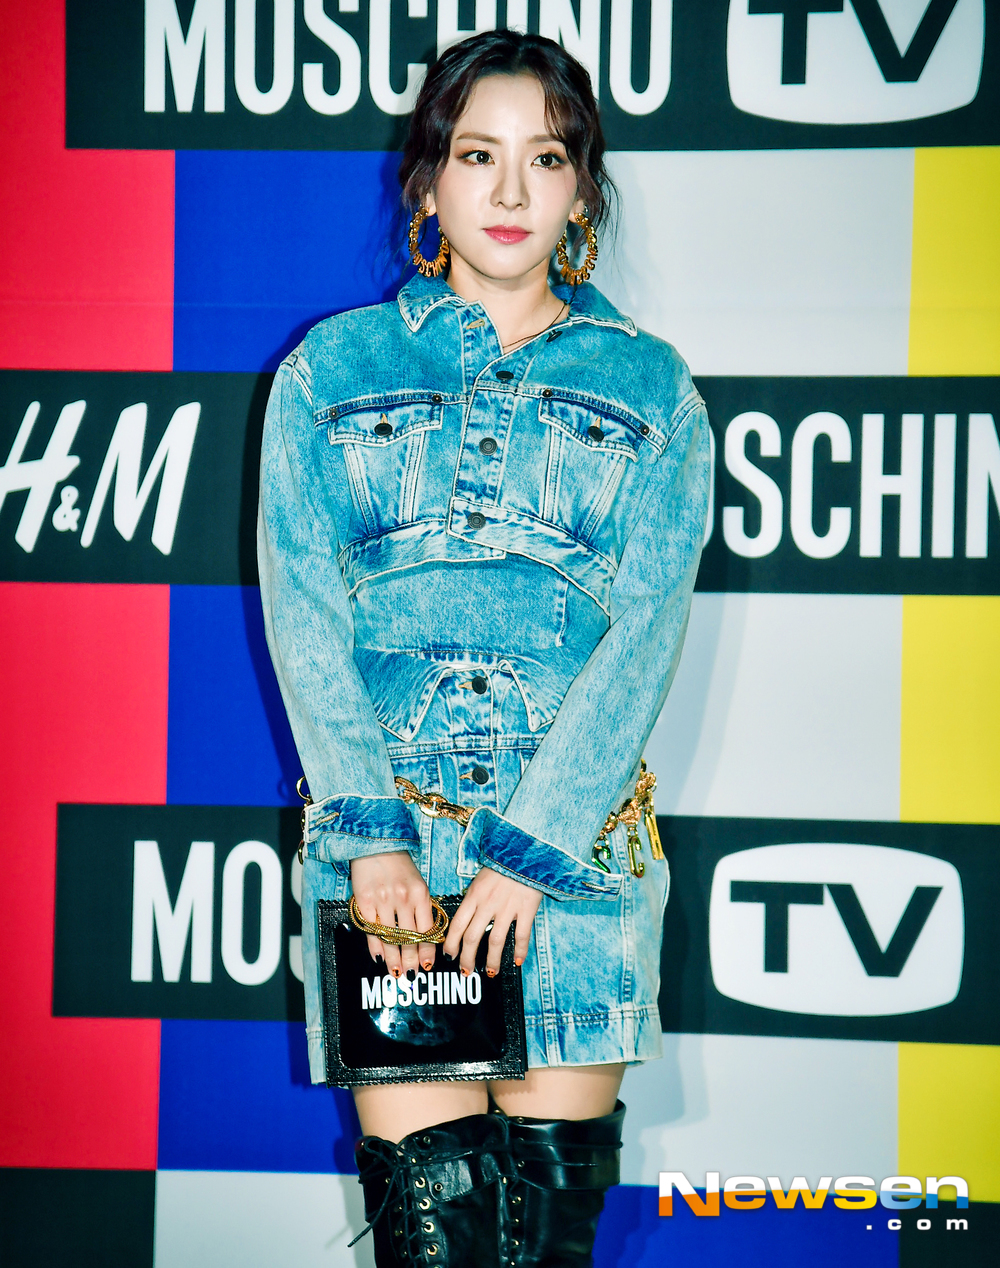 A collaboration launch Party for a mother fashion brand was held at Seongsu-dong Layer 57 on the afternoon of November 6.Singers Sandara Park, Hyorin, Hyoyeon (Girls Generation), El (Infinit), N (Bix), Bong Jae-hyun (Goldchild) Actors Ha Yeon-soo and Jung Yeon-ju attended the ceremony.